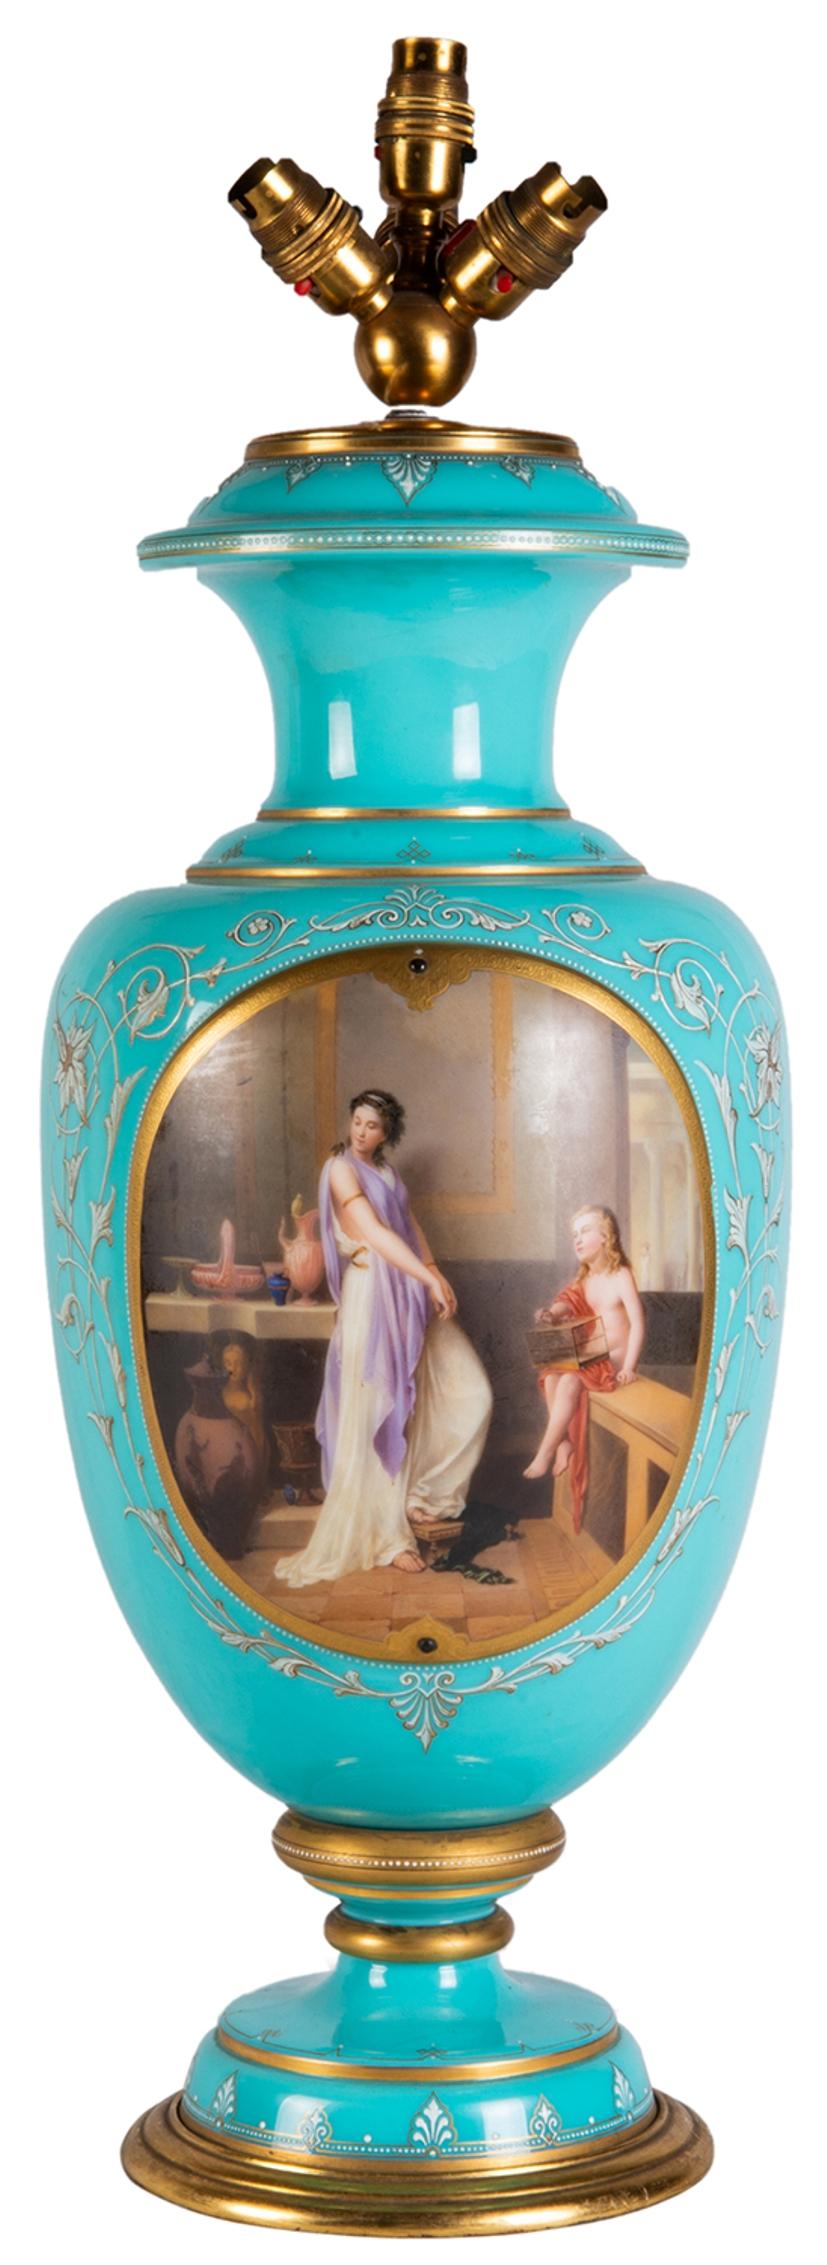 A very good quality late 19th century Bohemian glass vase / lamp, having a wonderful turquoise ground, with gilded decoration, an inset painted panel depicting a classical maiden with a child sitting holding a bird cage.